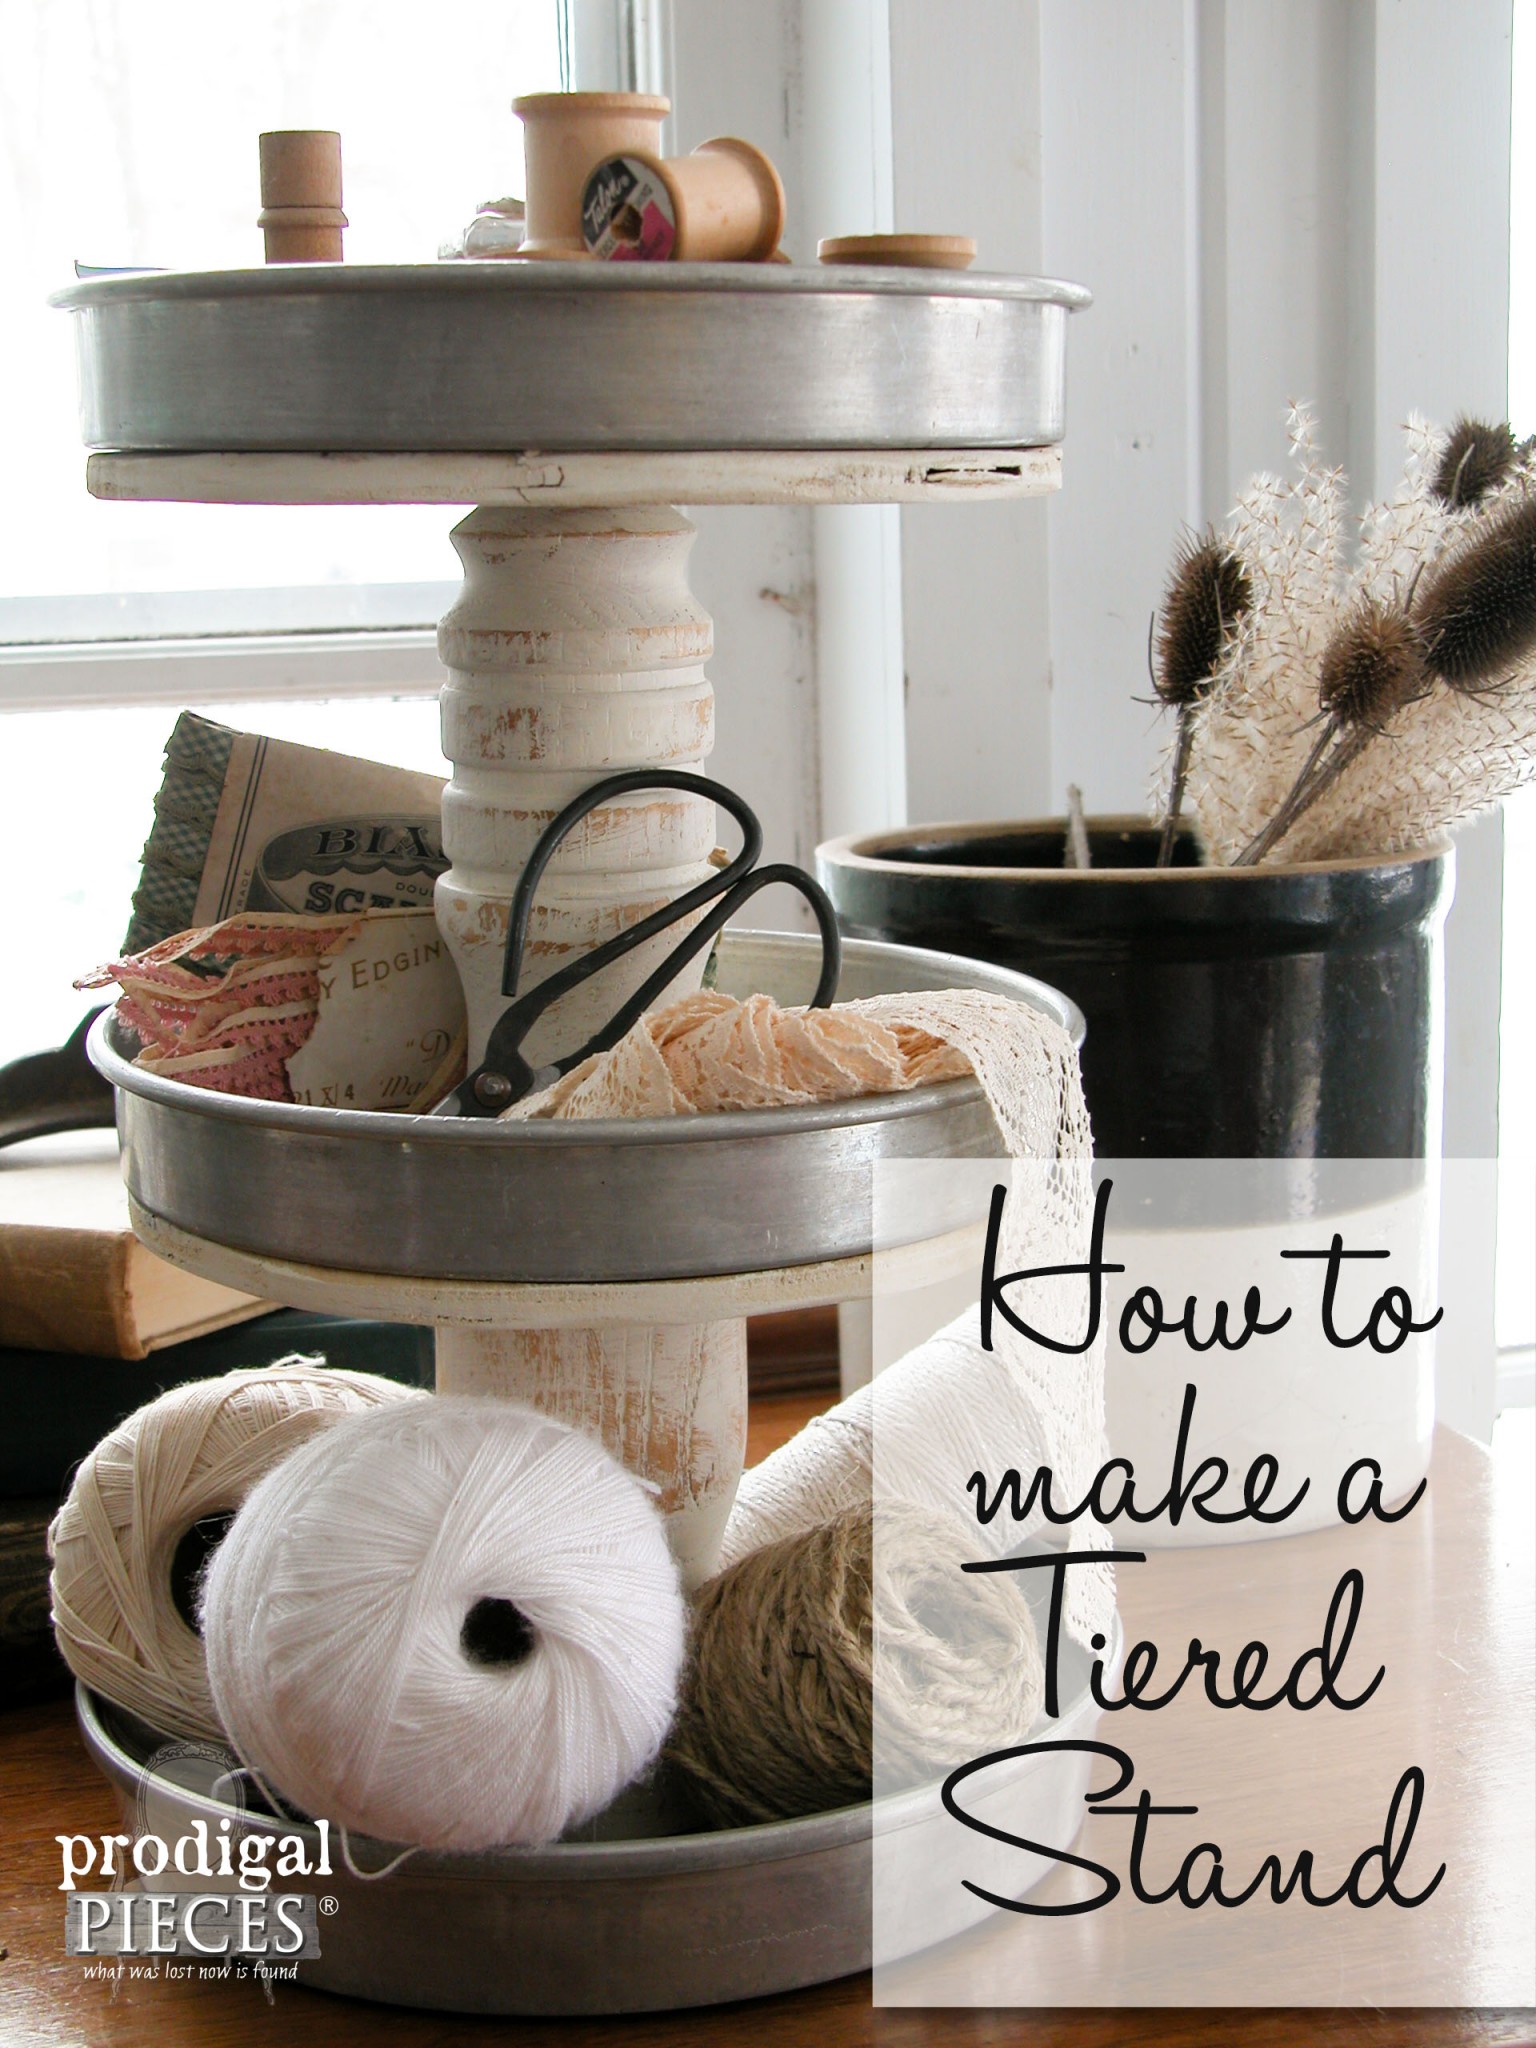 How to Make a Tiered Stand | Prodigal Pieces | www.prodigalpieces.com